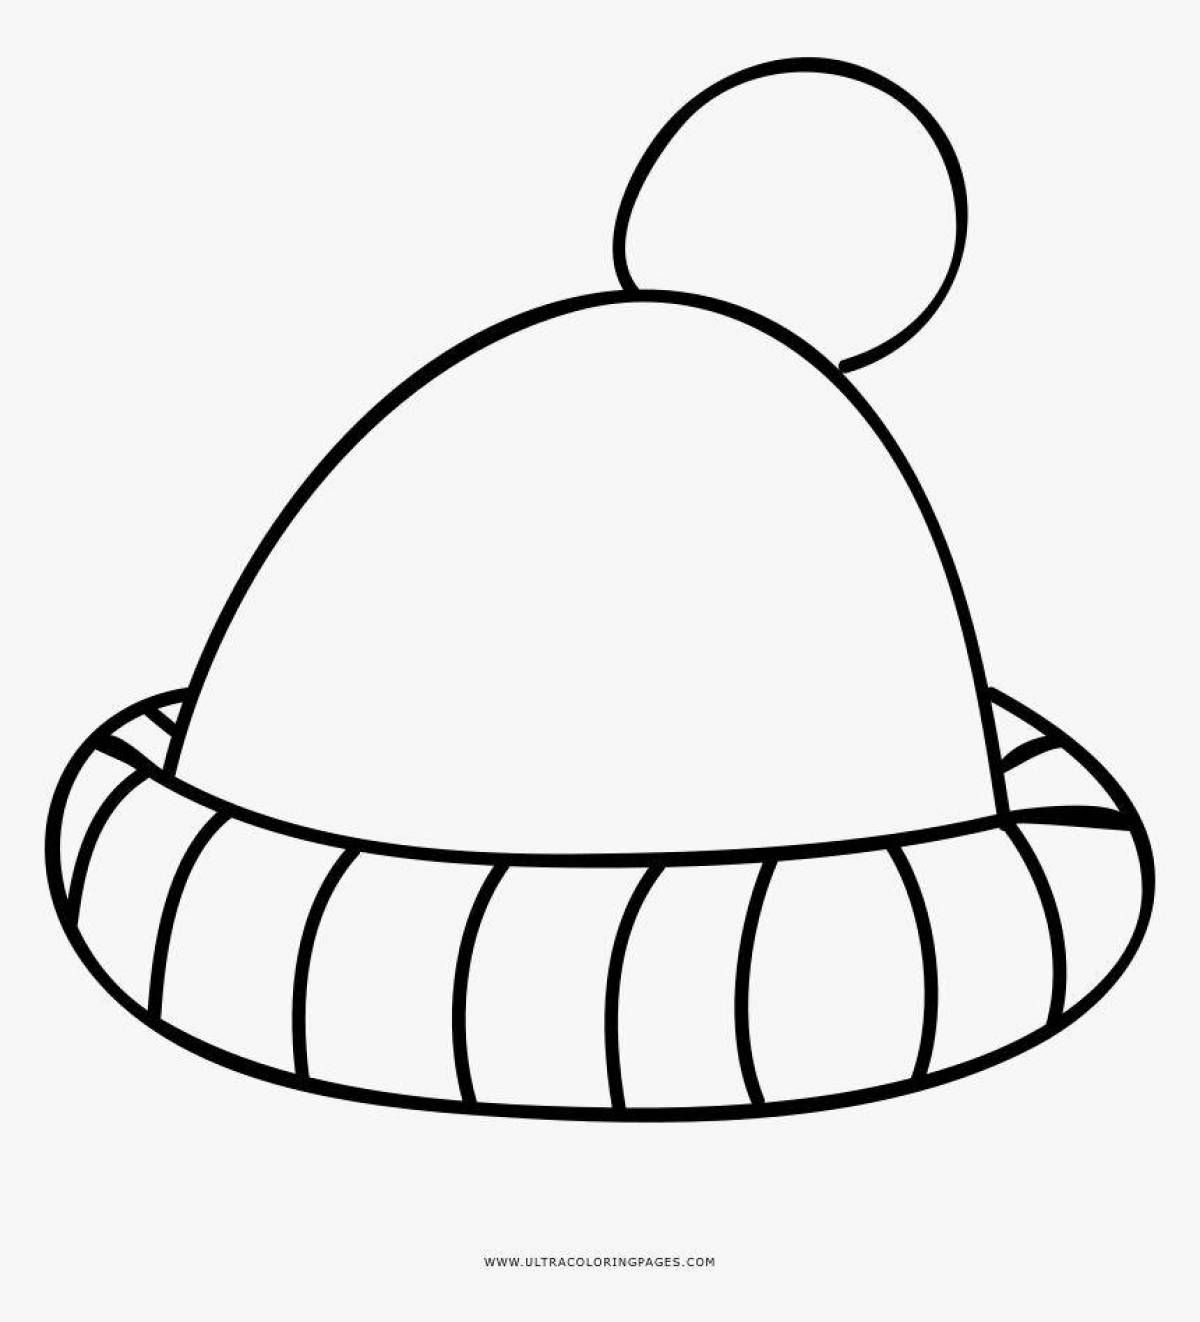 Coloured hat coloring book for 3-4 year olds